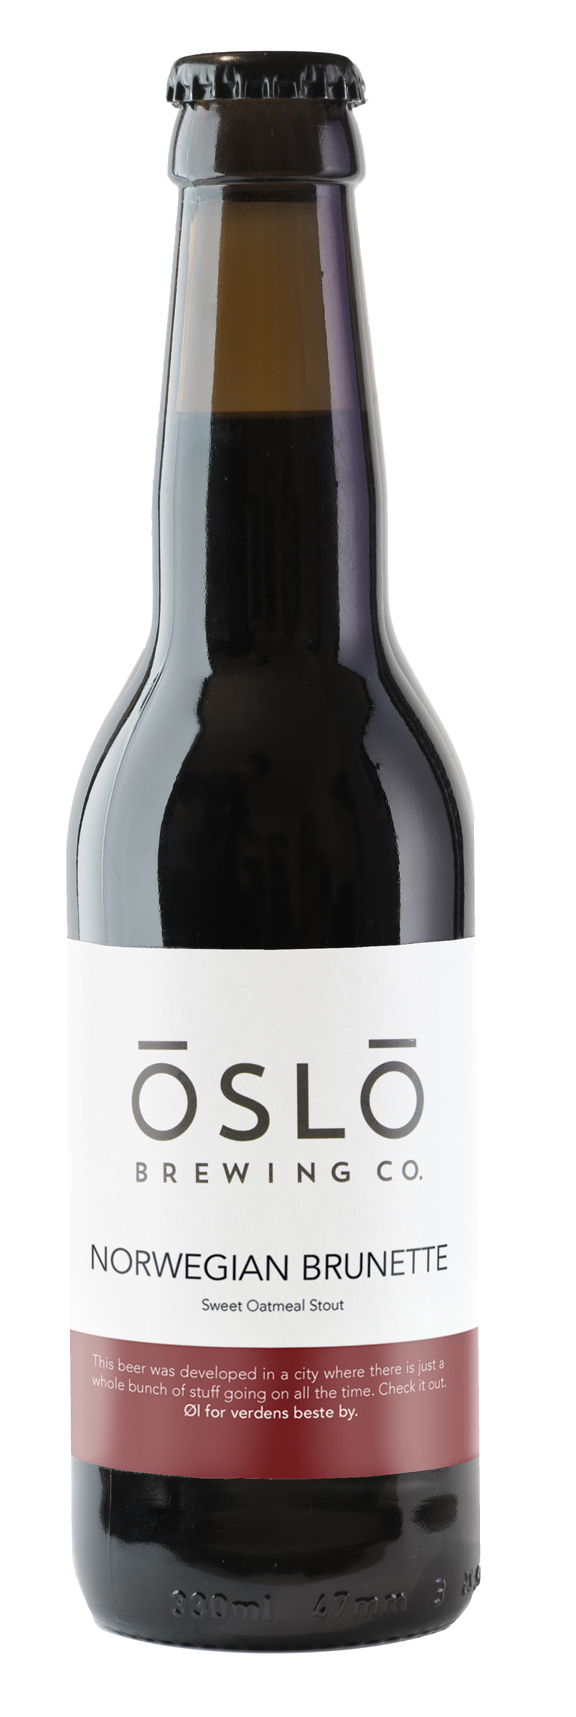 Product image of Oslo Brewing Company - Norwegian Brunette